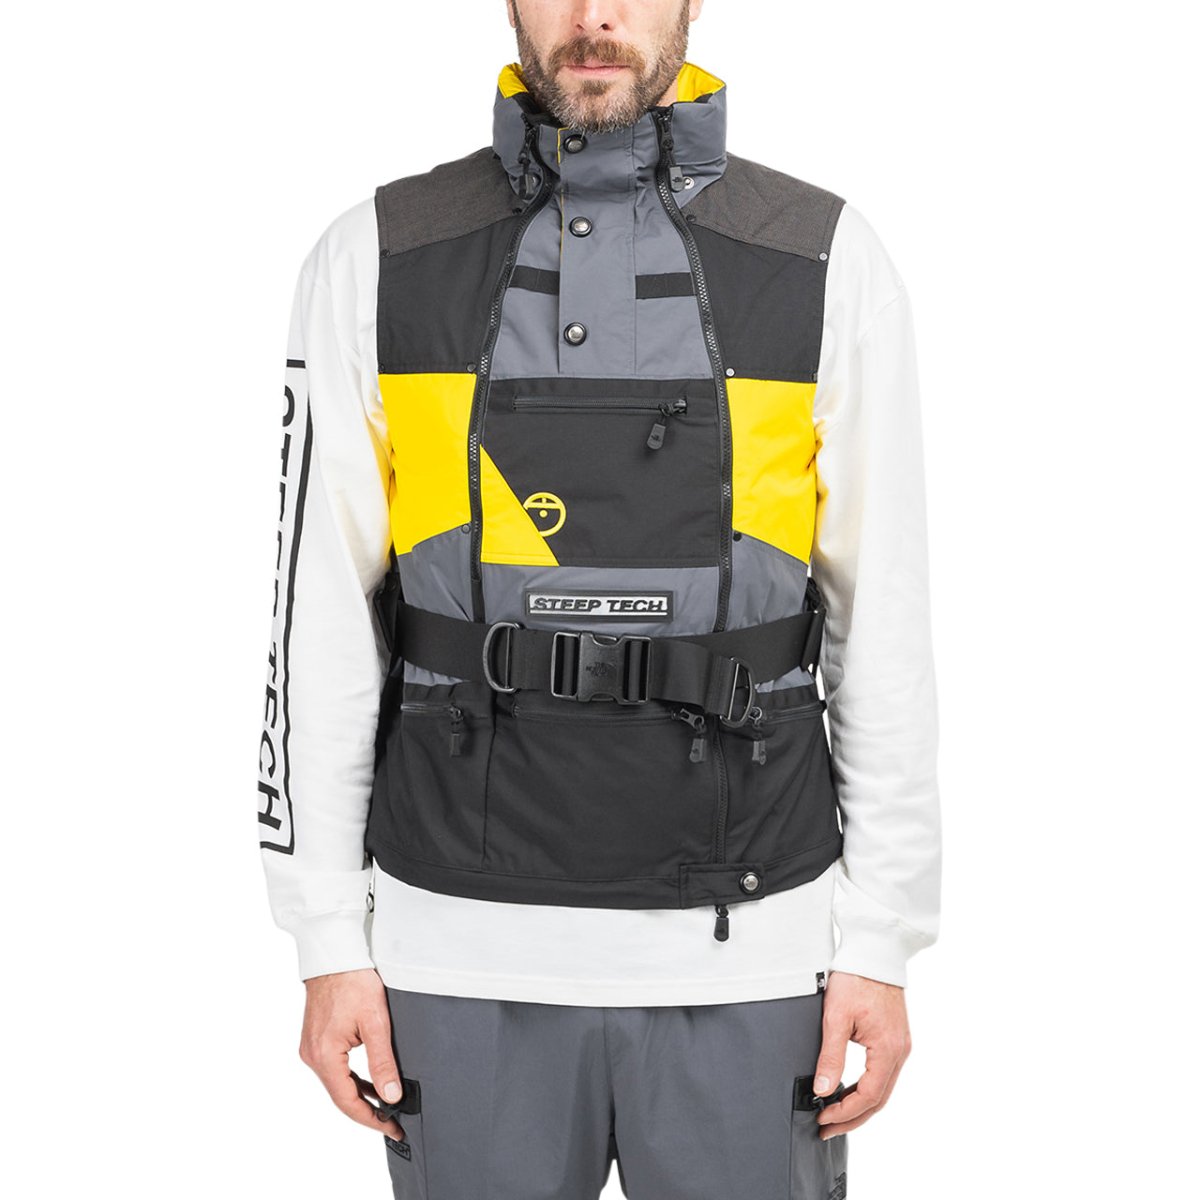 The North Face Steep Tech Vest (Grey / Yellow / Black)